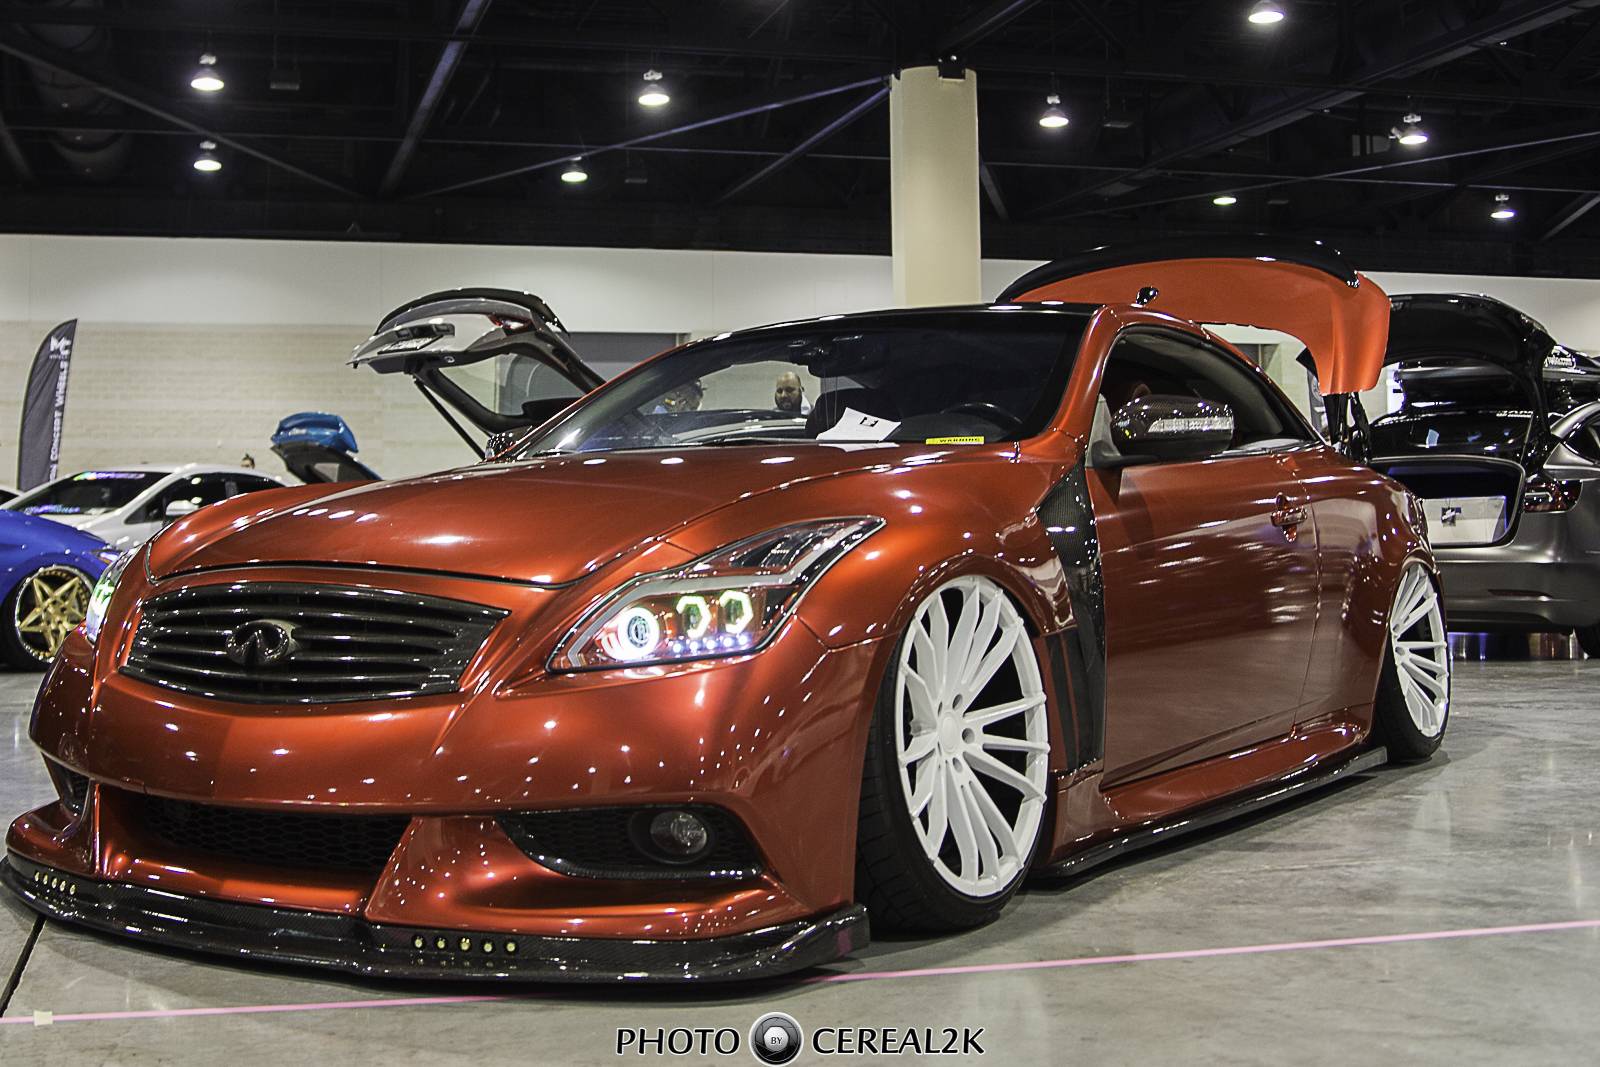 Do you think a g37 Infiniti is the best first car?